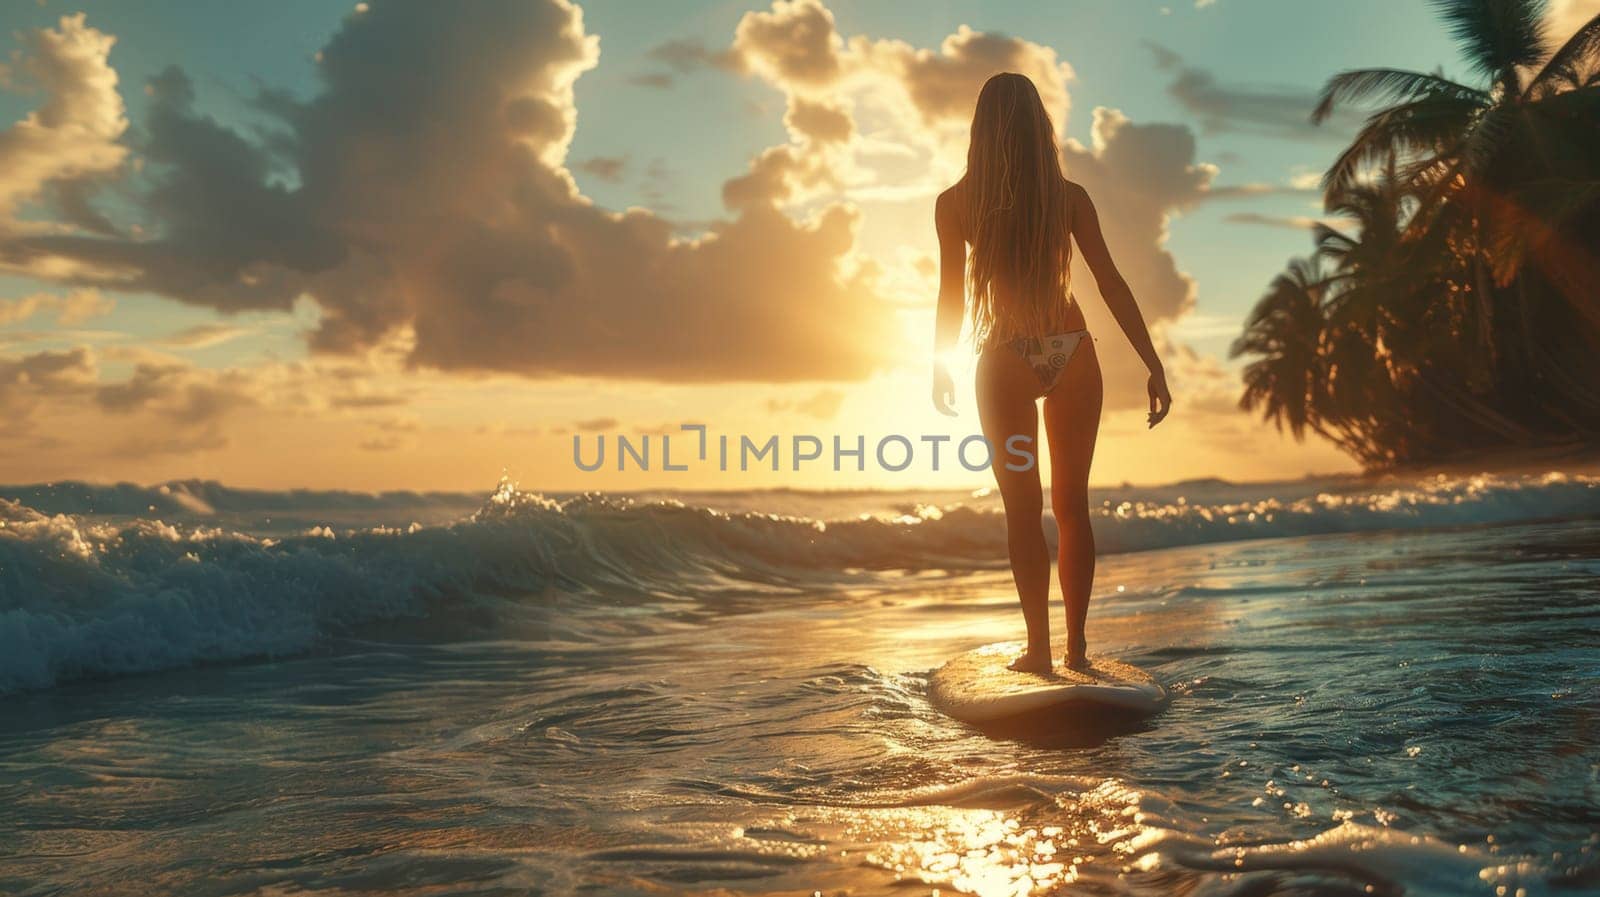 A young girl in a bikini is a surfer with a surfboard, floating on the waves by Lobachad